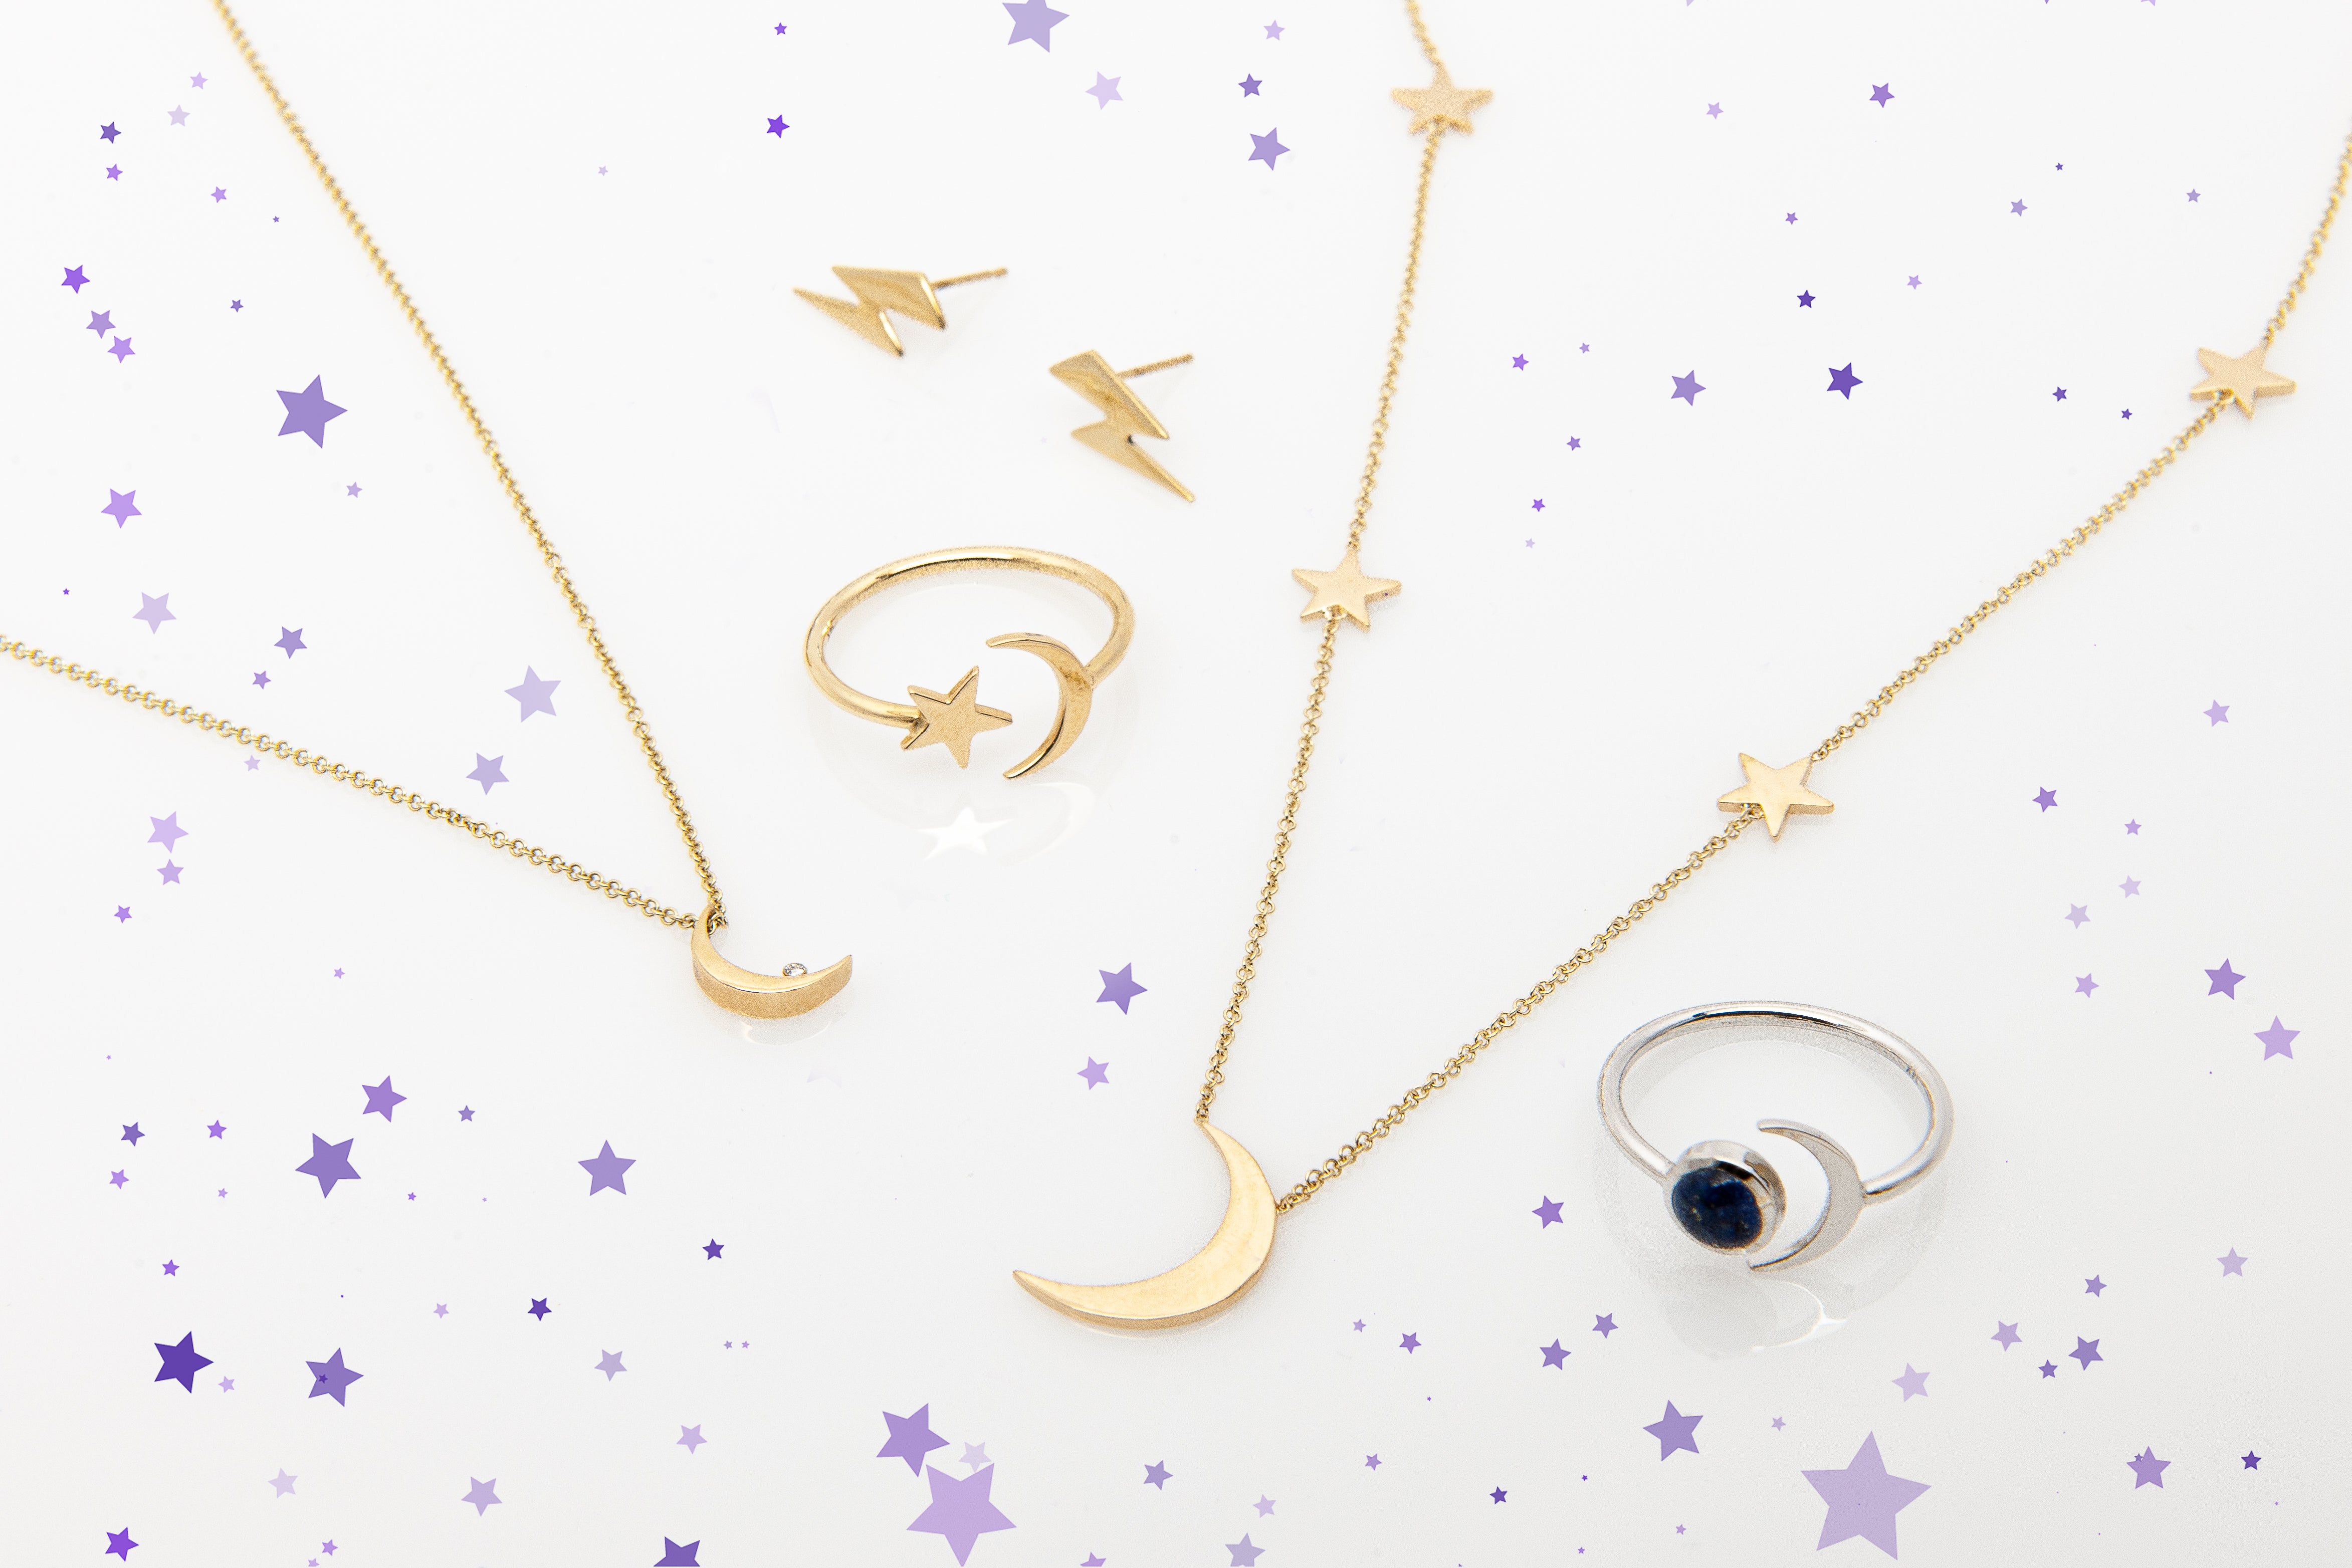 A preview of Starflower Jewelry’s celestial collection, including 14k Yellow Gold Striking Lightning Bolt Earrings